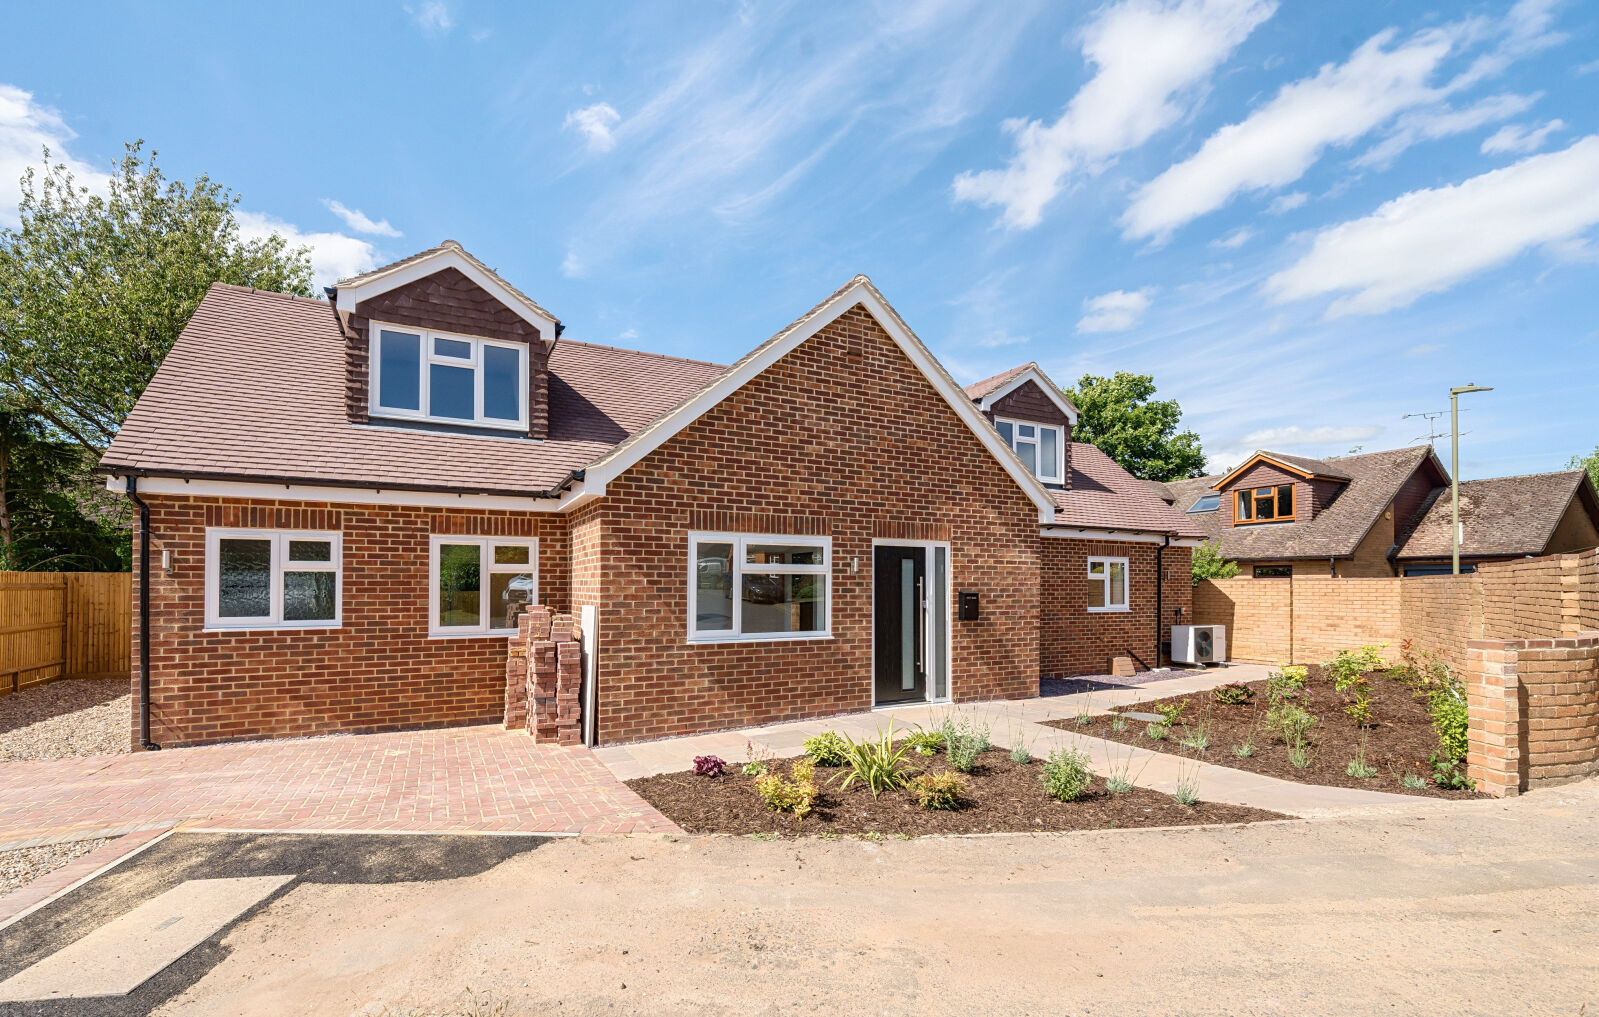 3 bedroom detached house for sale West Chiltern, Woodcote, RG8, main image